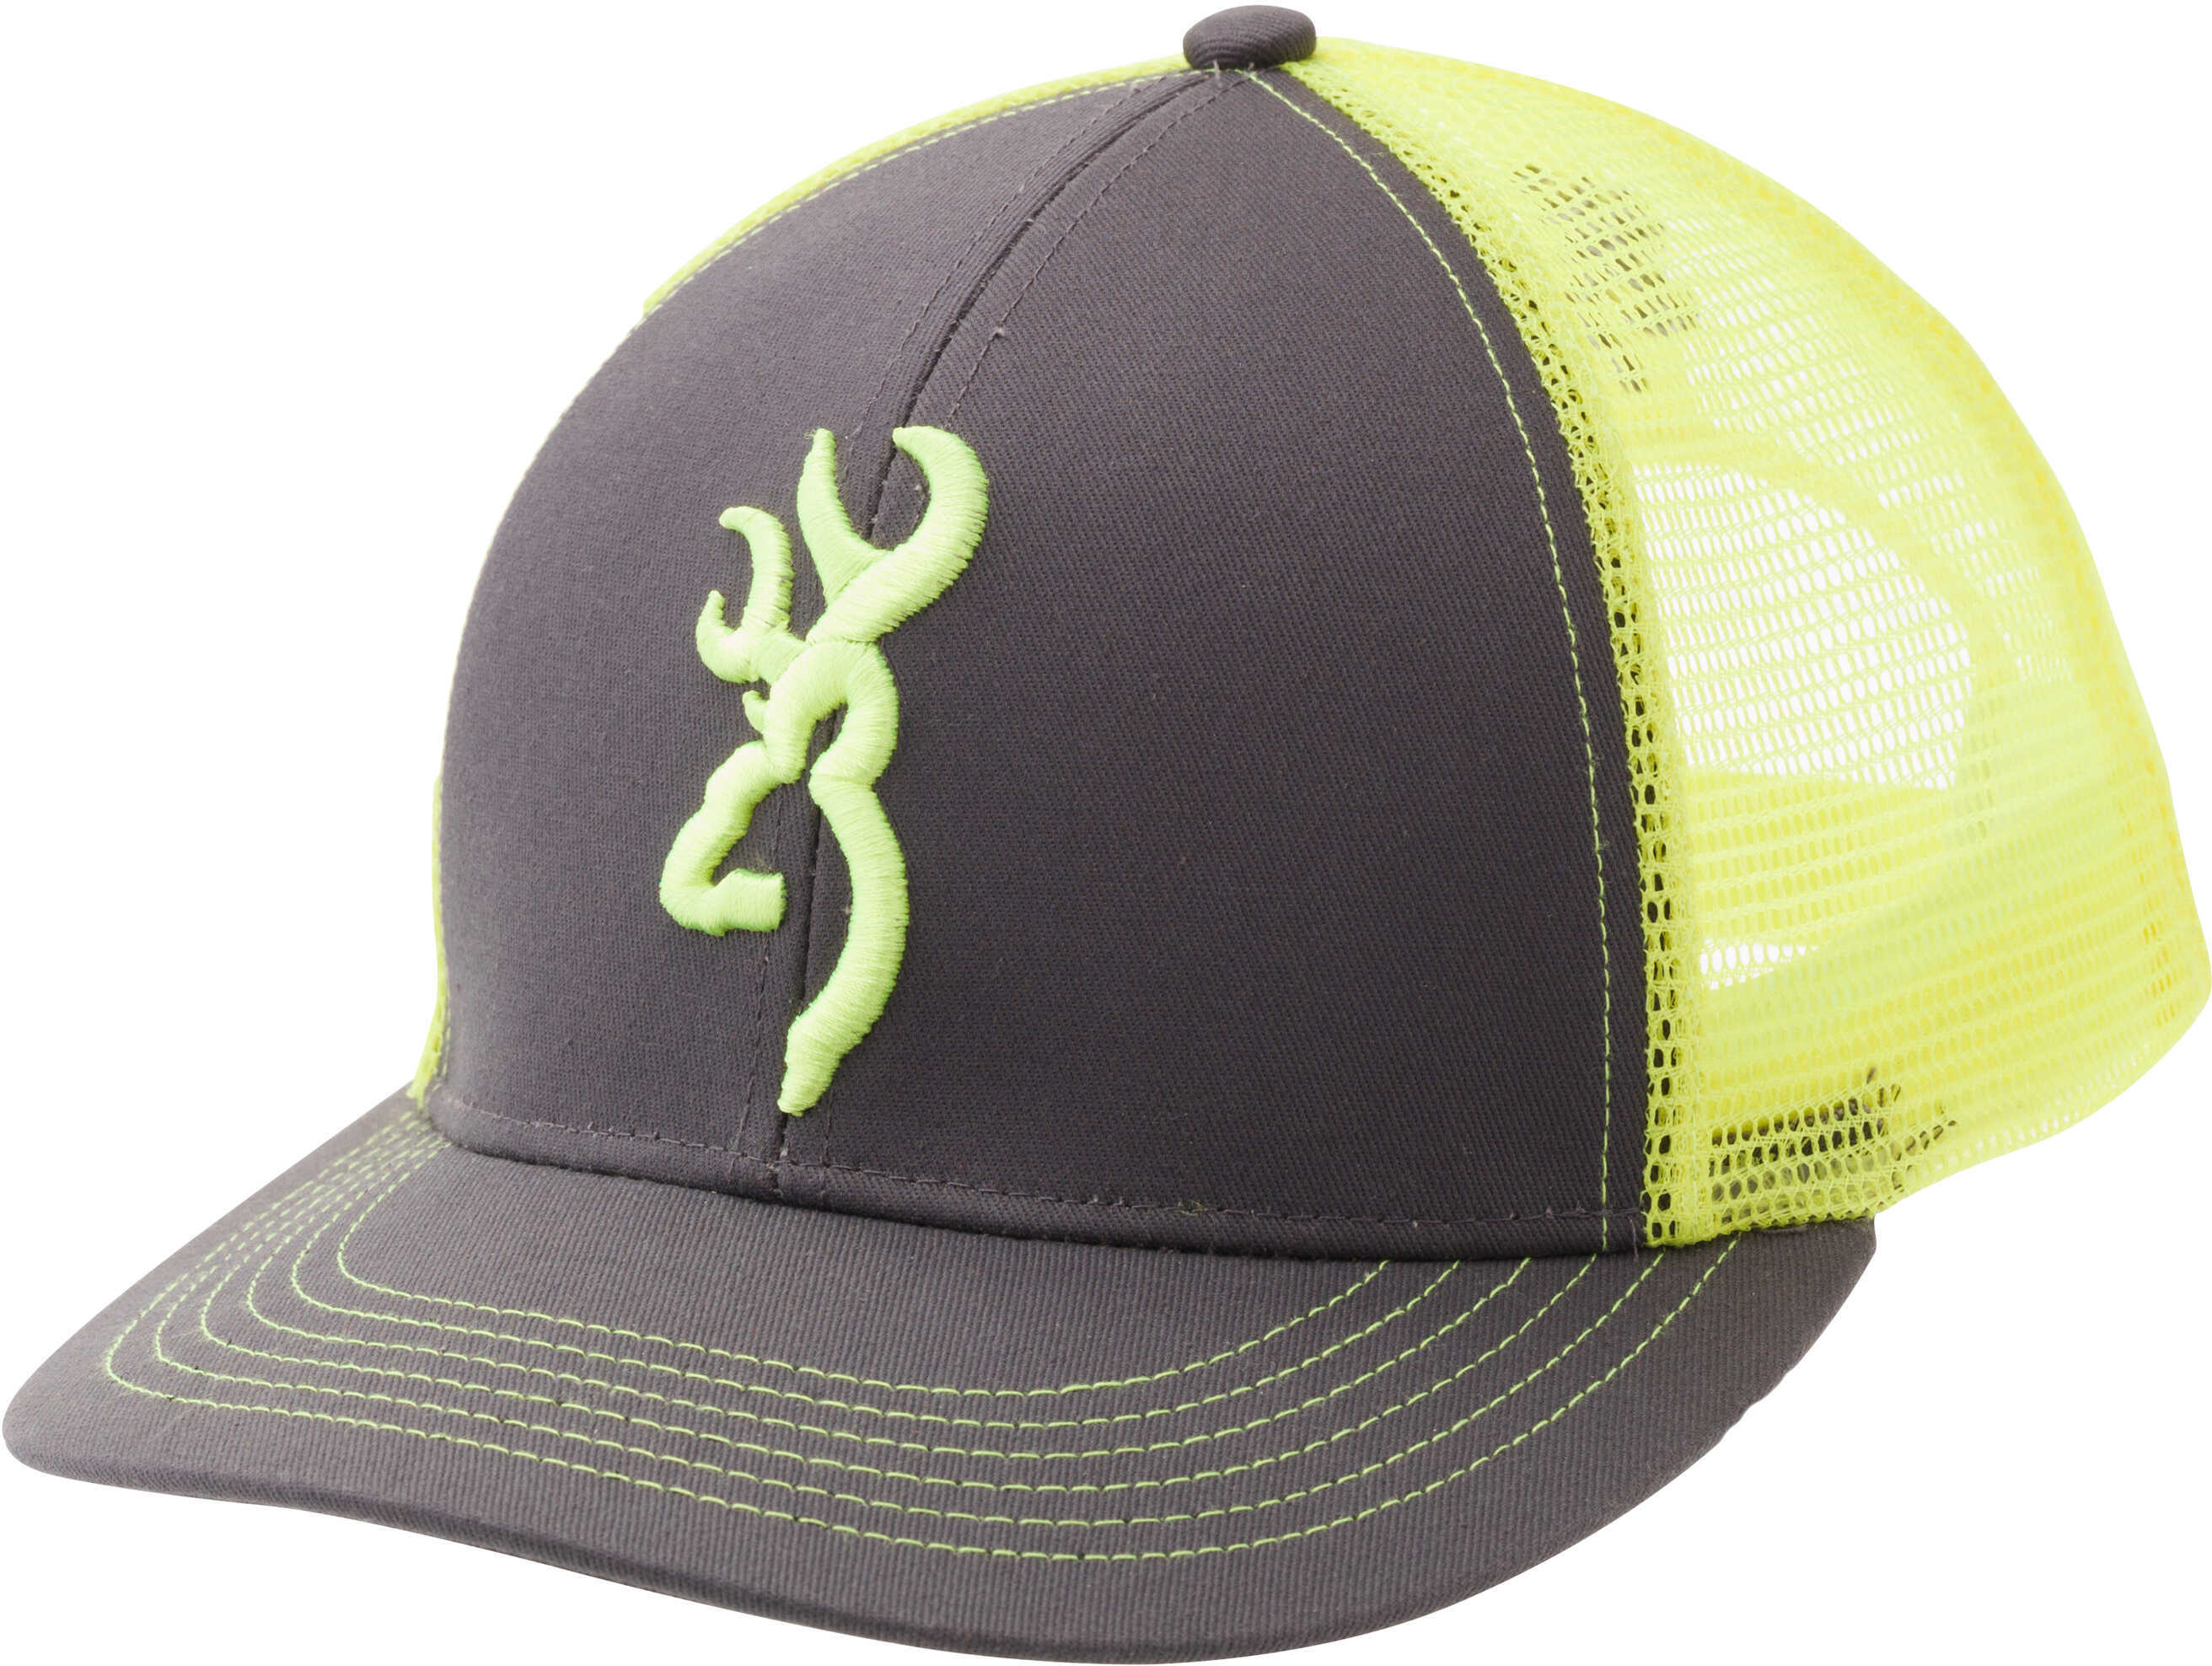 Browning Flashback Cap Charcoal/Green Md: 308177541